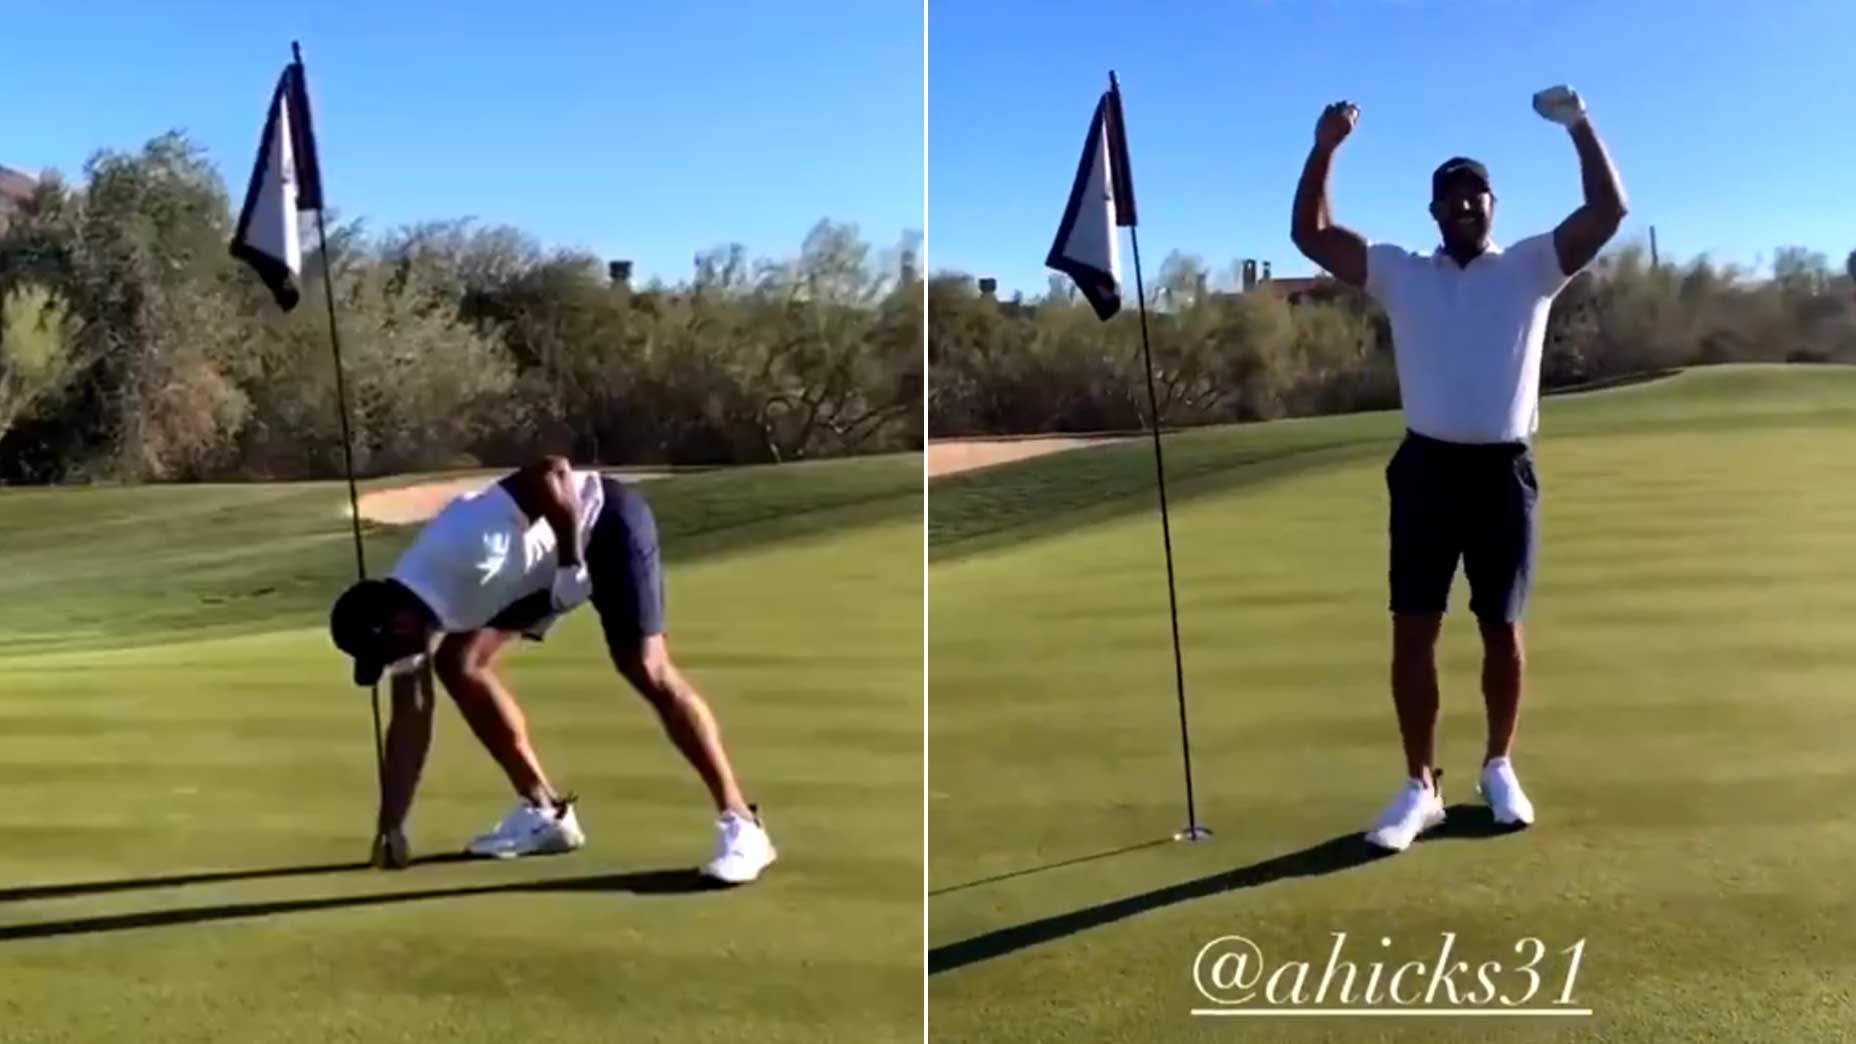 NY Yankees' Aaron Hicks makes hole-in-one on a par-4 with a 3-wood